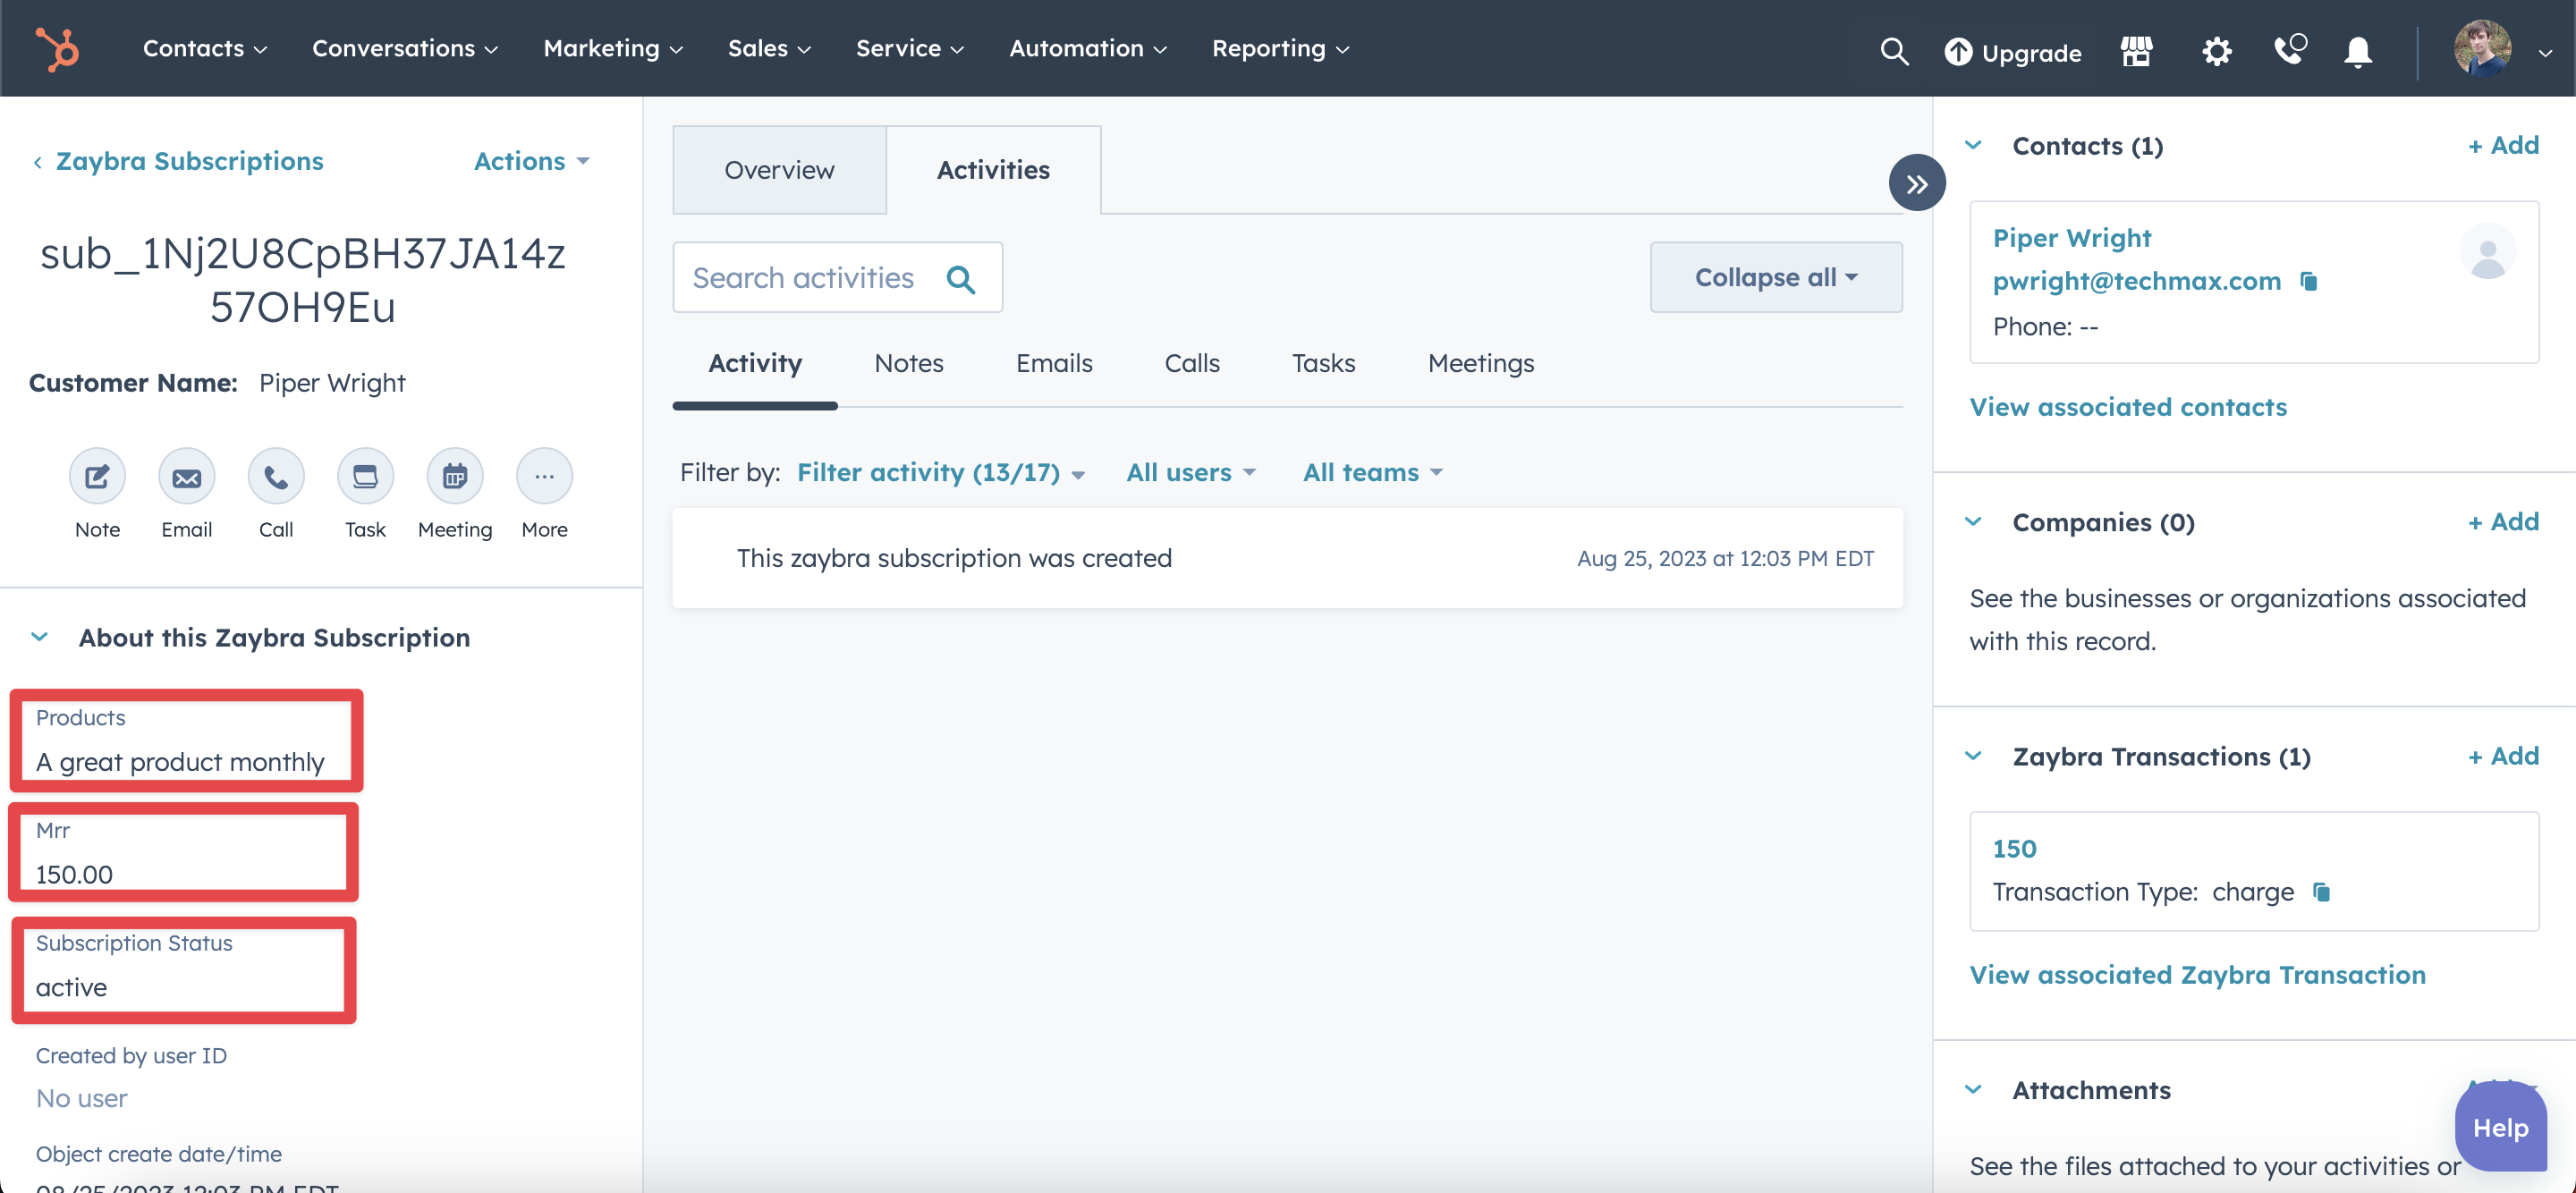 How to report on Stripe data in HubSpot